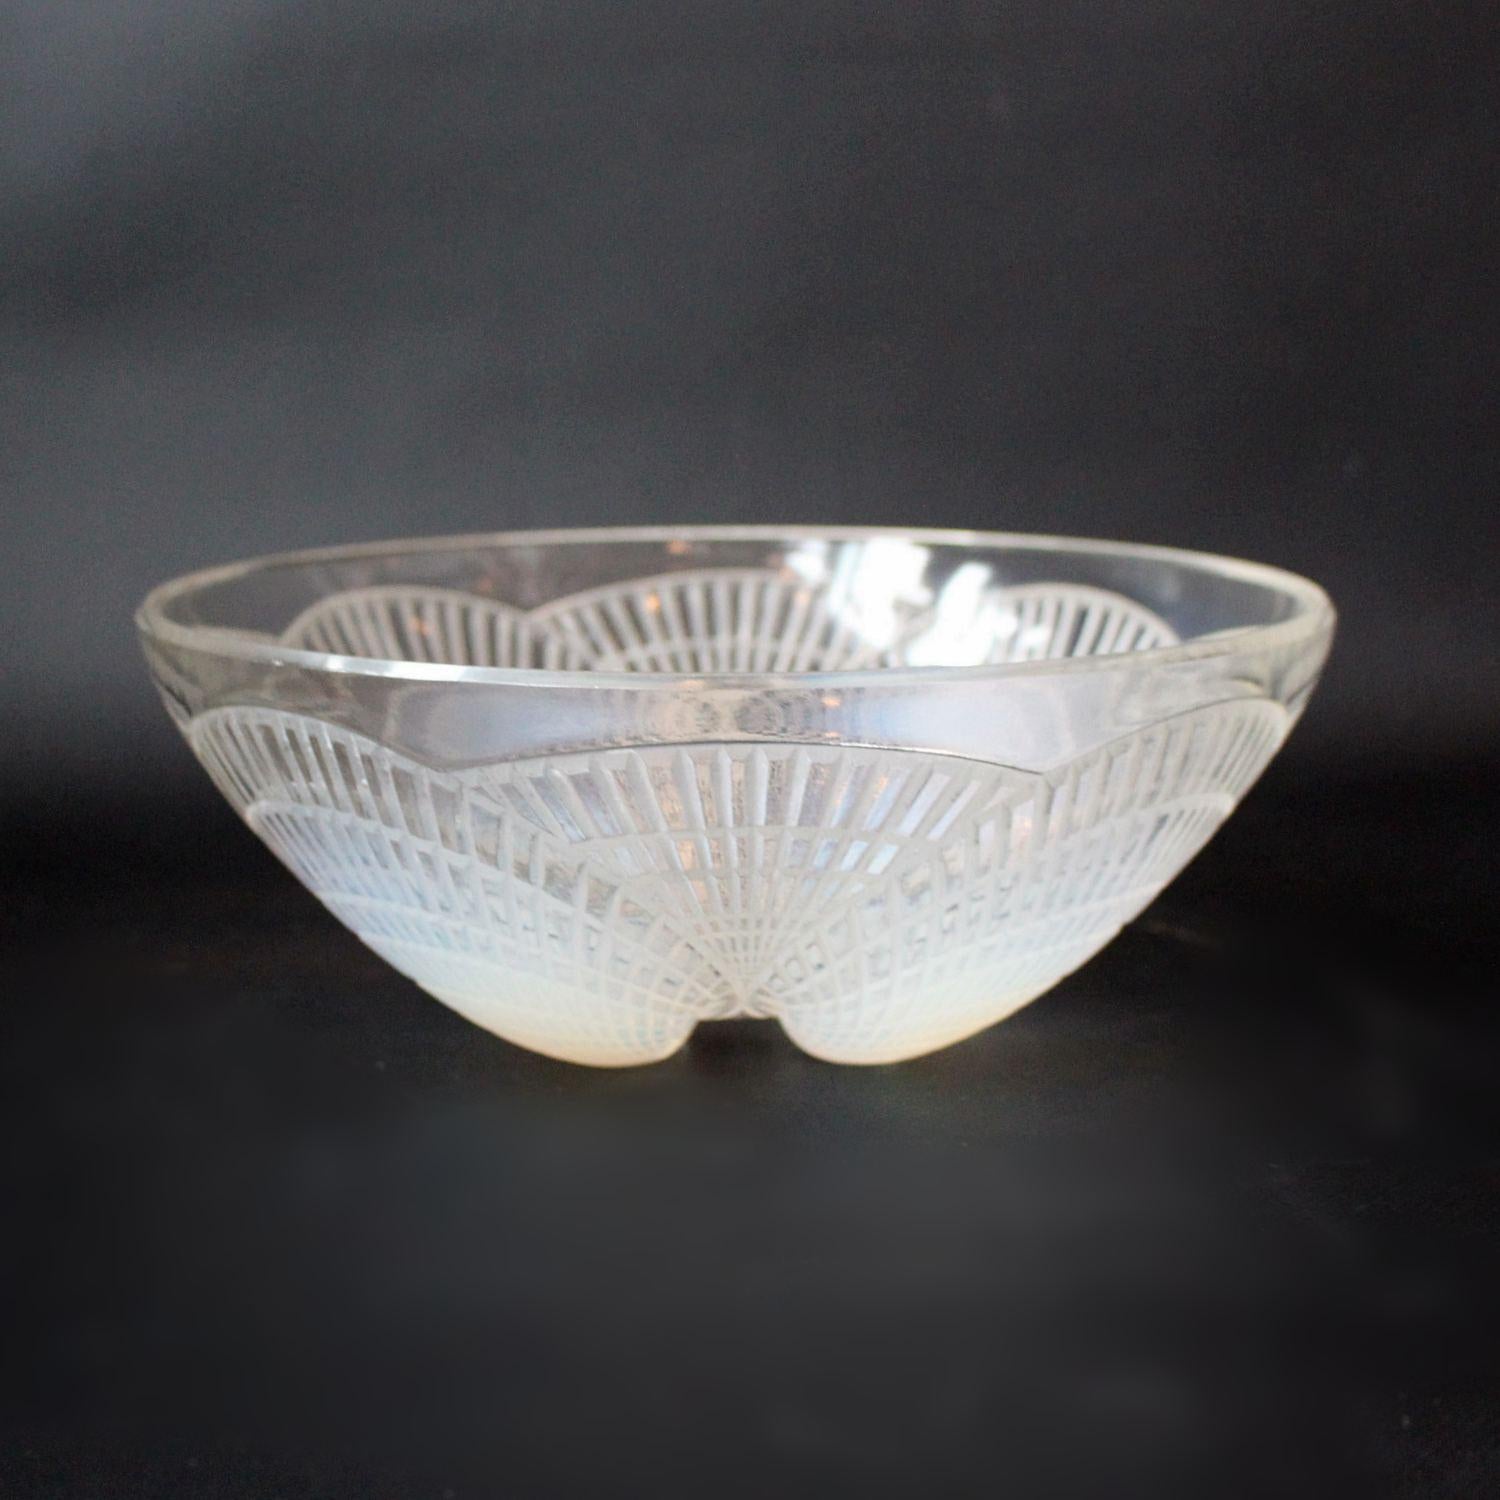 Coupe Coquilles no. 1, an Art Deco, blue opalescent glass bowl. Covered with raised, geometric motif of scallop shells. Model no. 3200. Etched R. Lalique France and numbered to base.
Literature: Marcilhoc, R. Lalique Catalogue Raisonne de L'Oeuvre